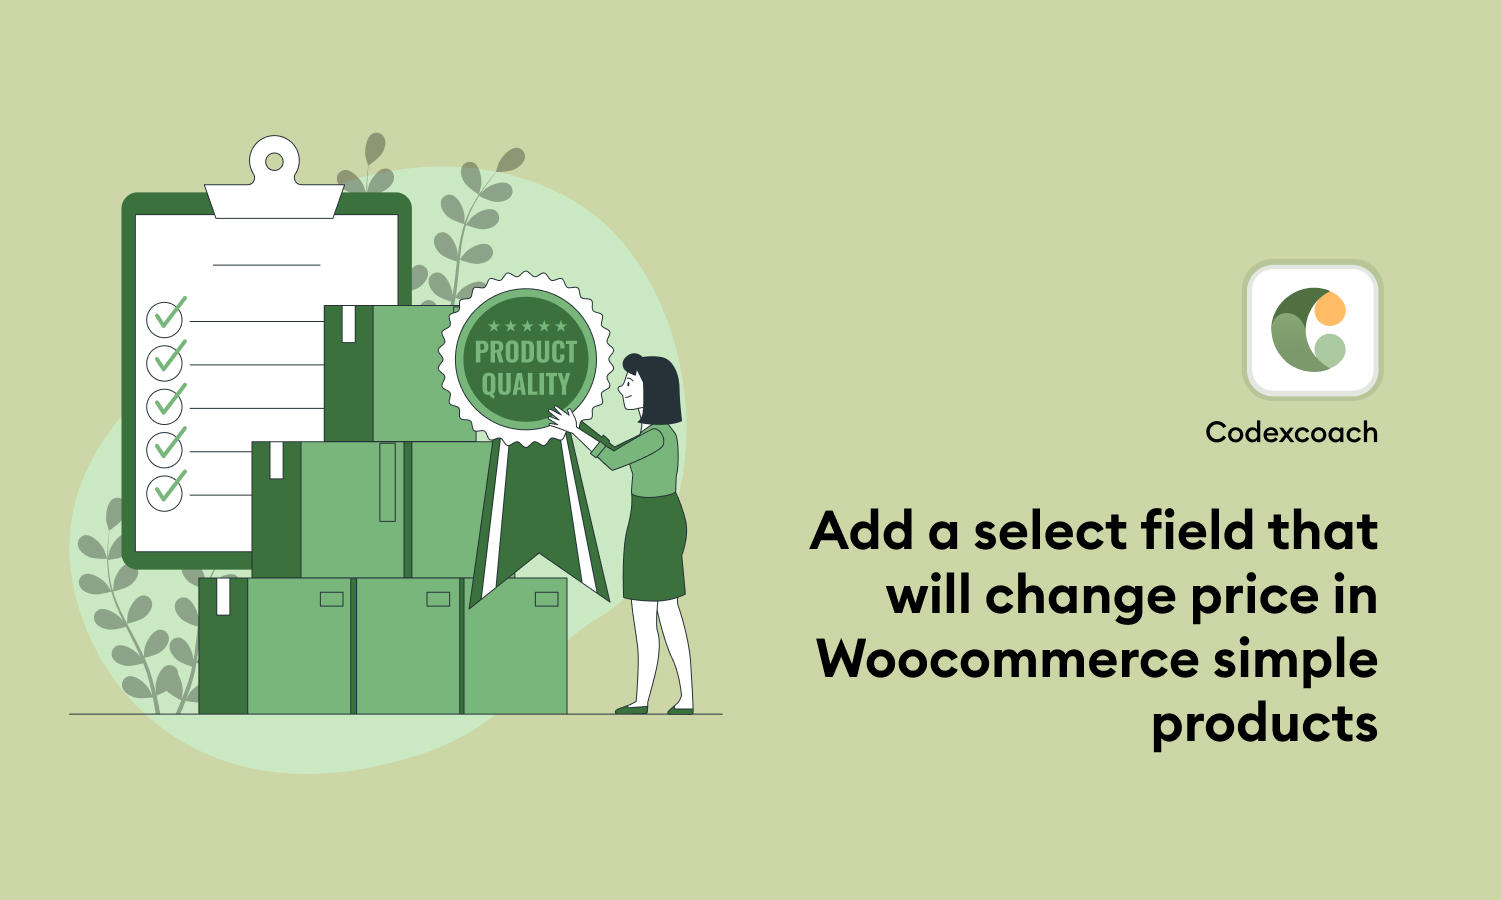 Add a select field that will change price in Woocommerce simple products